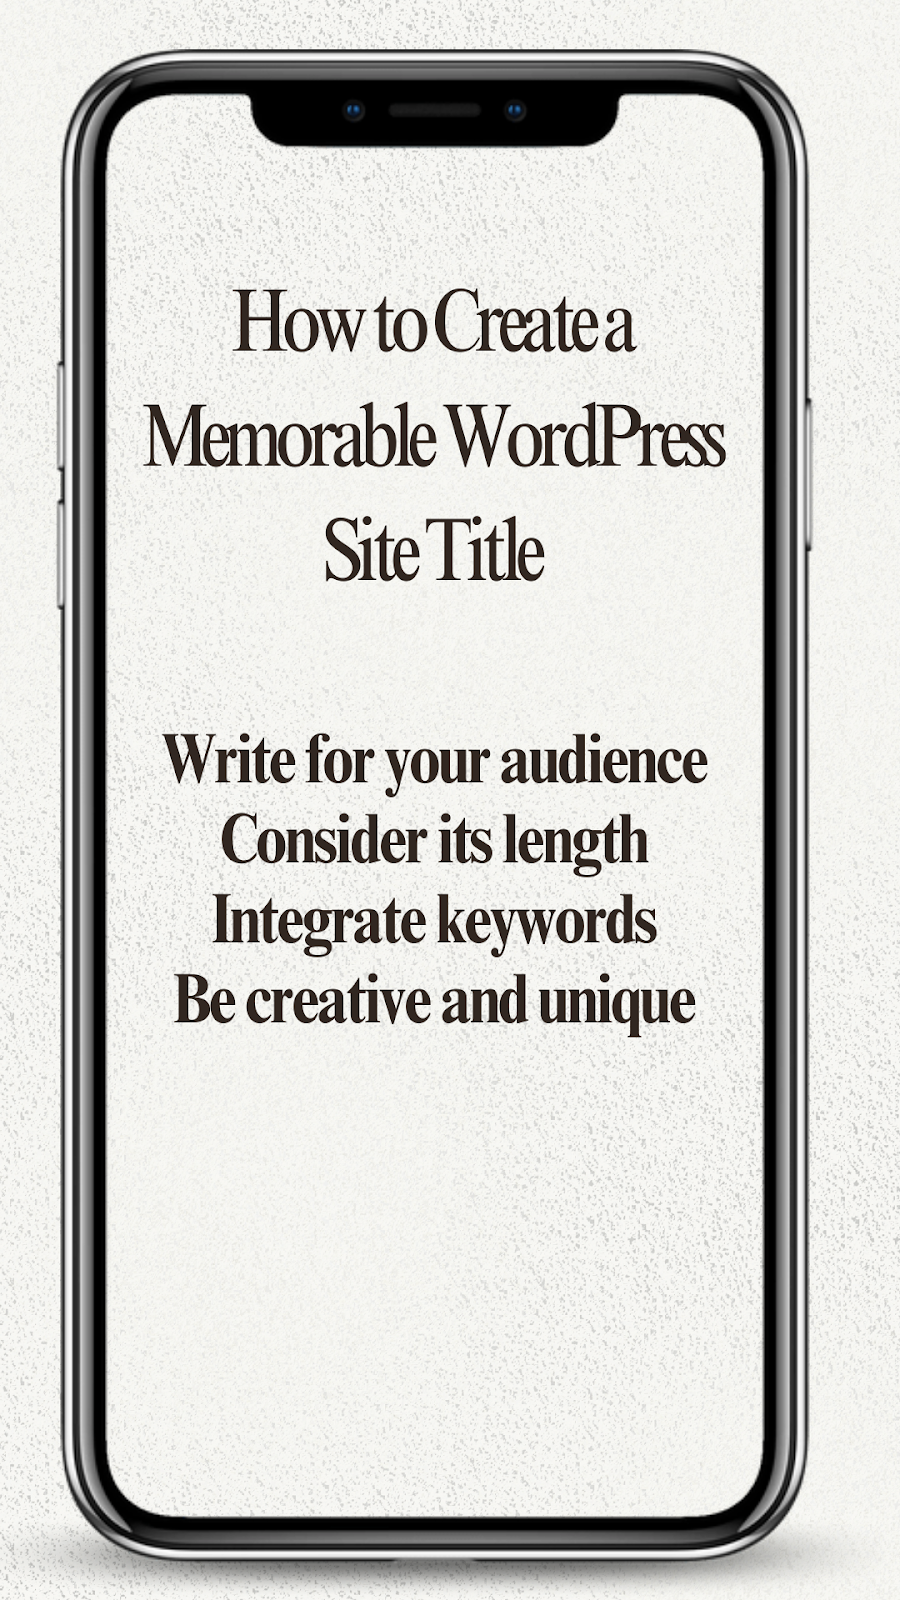 How to Create a Memorable WordPress Site Title